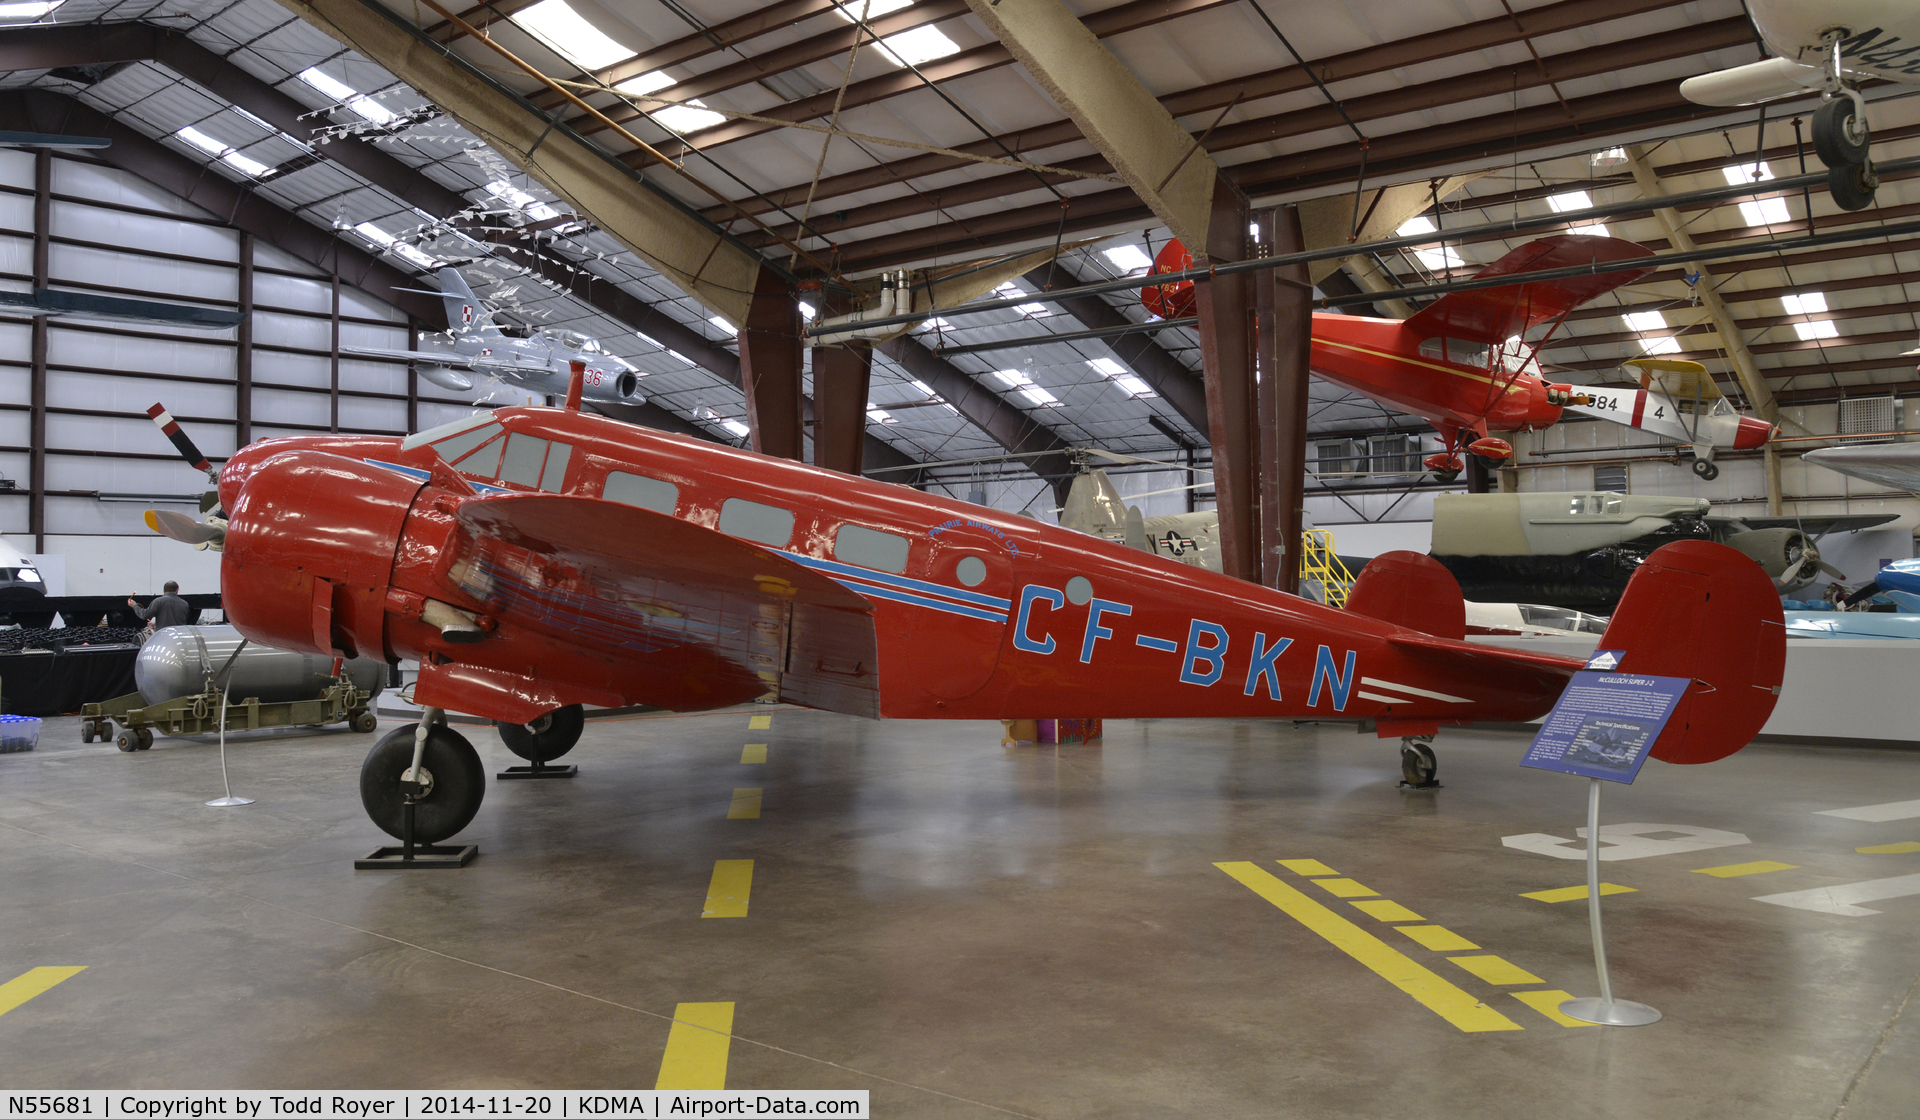 N55681, Beech 18D C/N 177, On display at the Pima Air and Space Museum